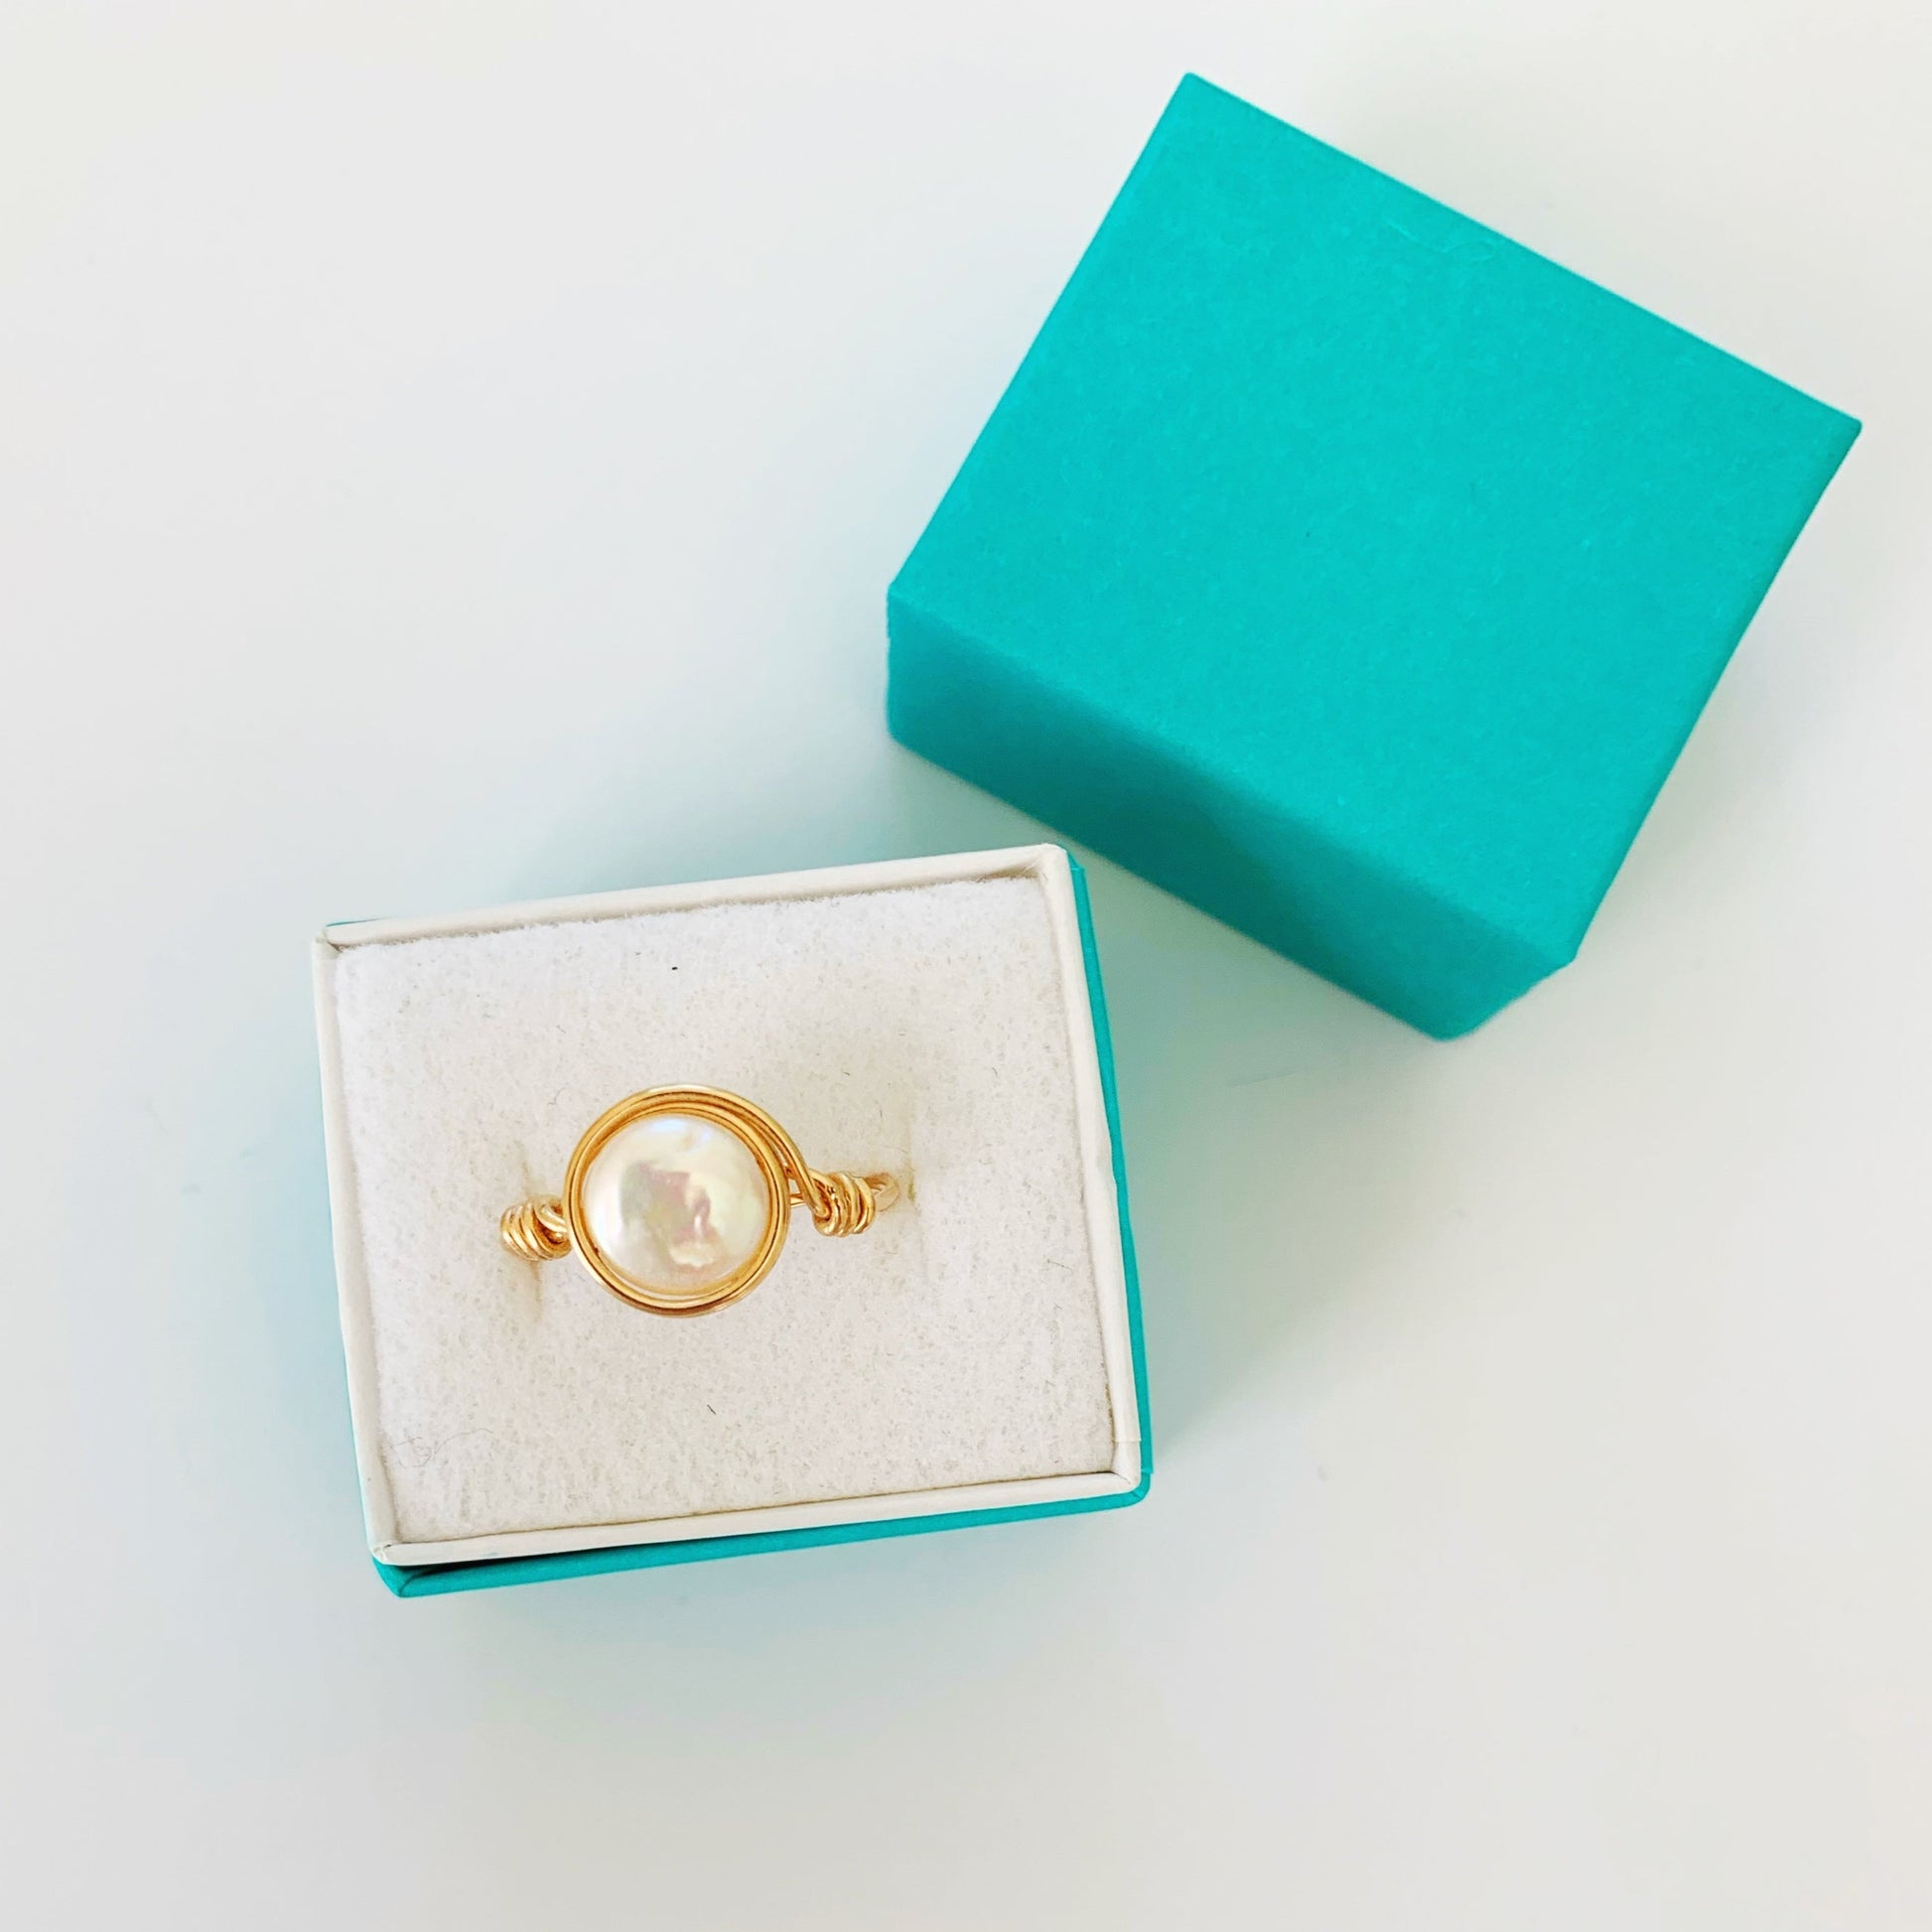 Newport pearl wire wrapped ring with freshwater coin pearl and 14k gold filled wire. pictured here in a teal ring gift box on a white surface